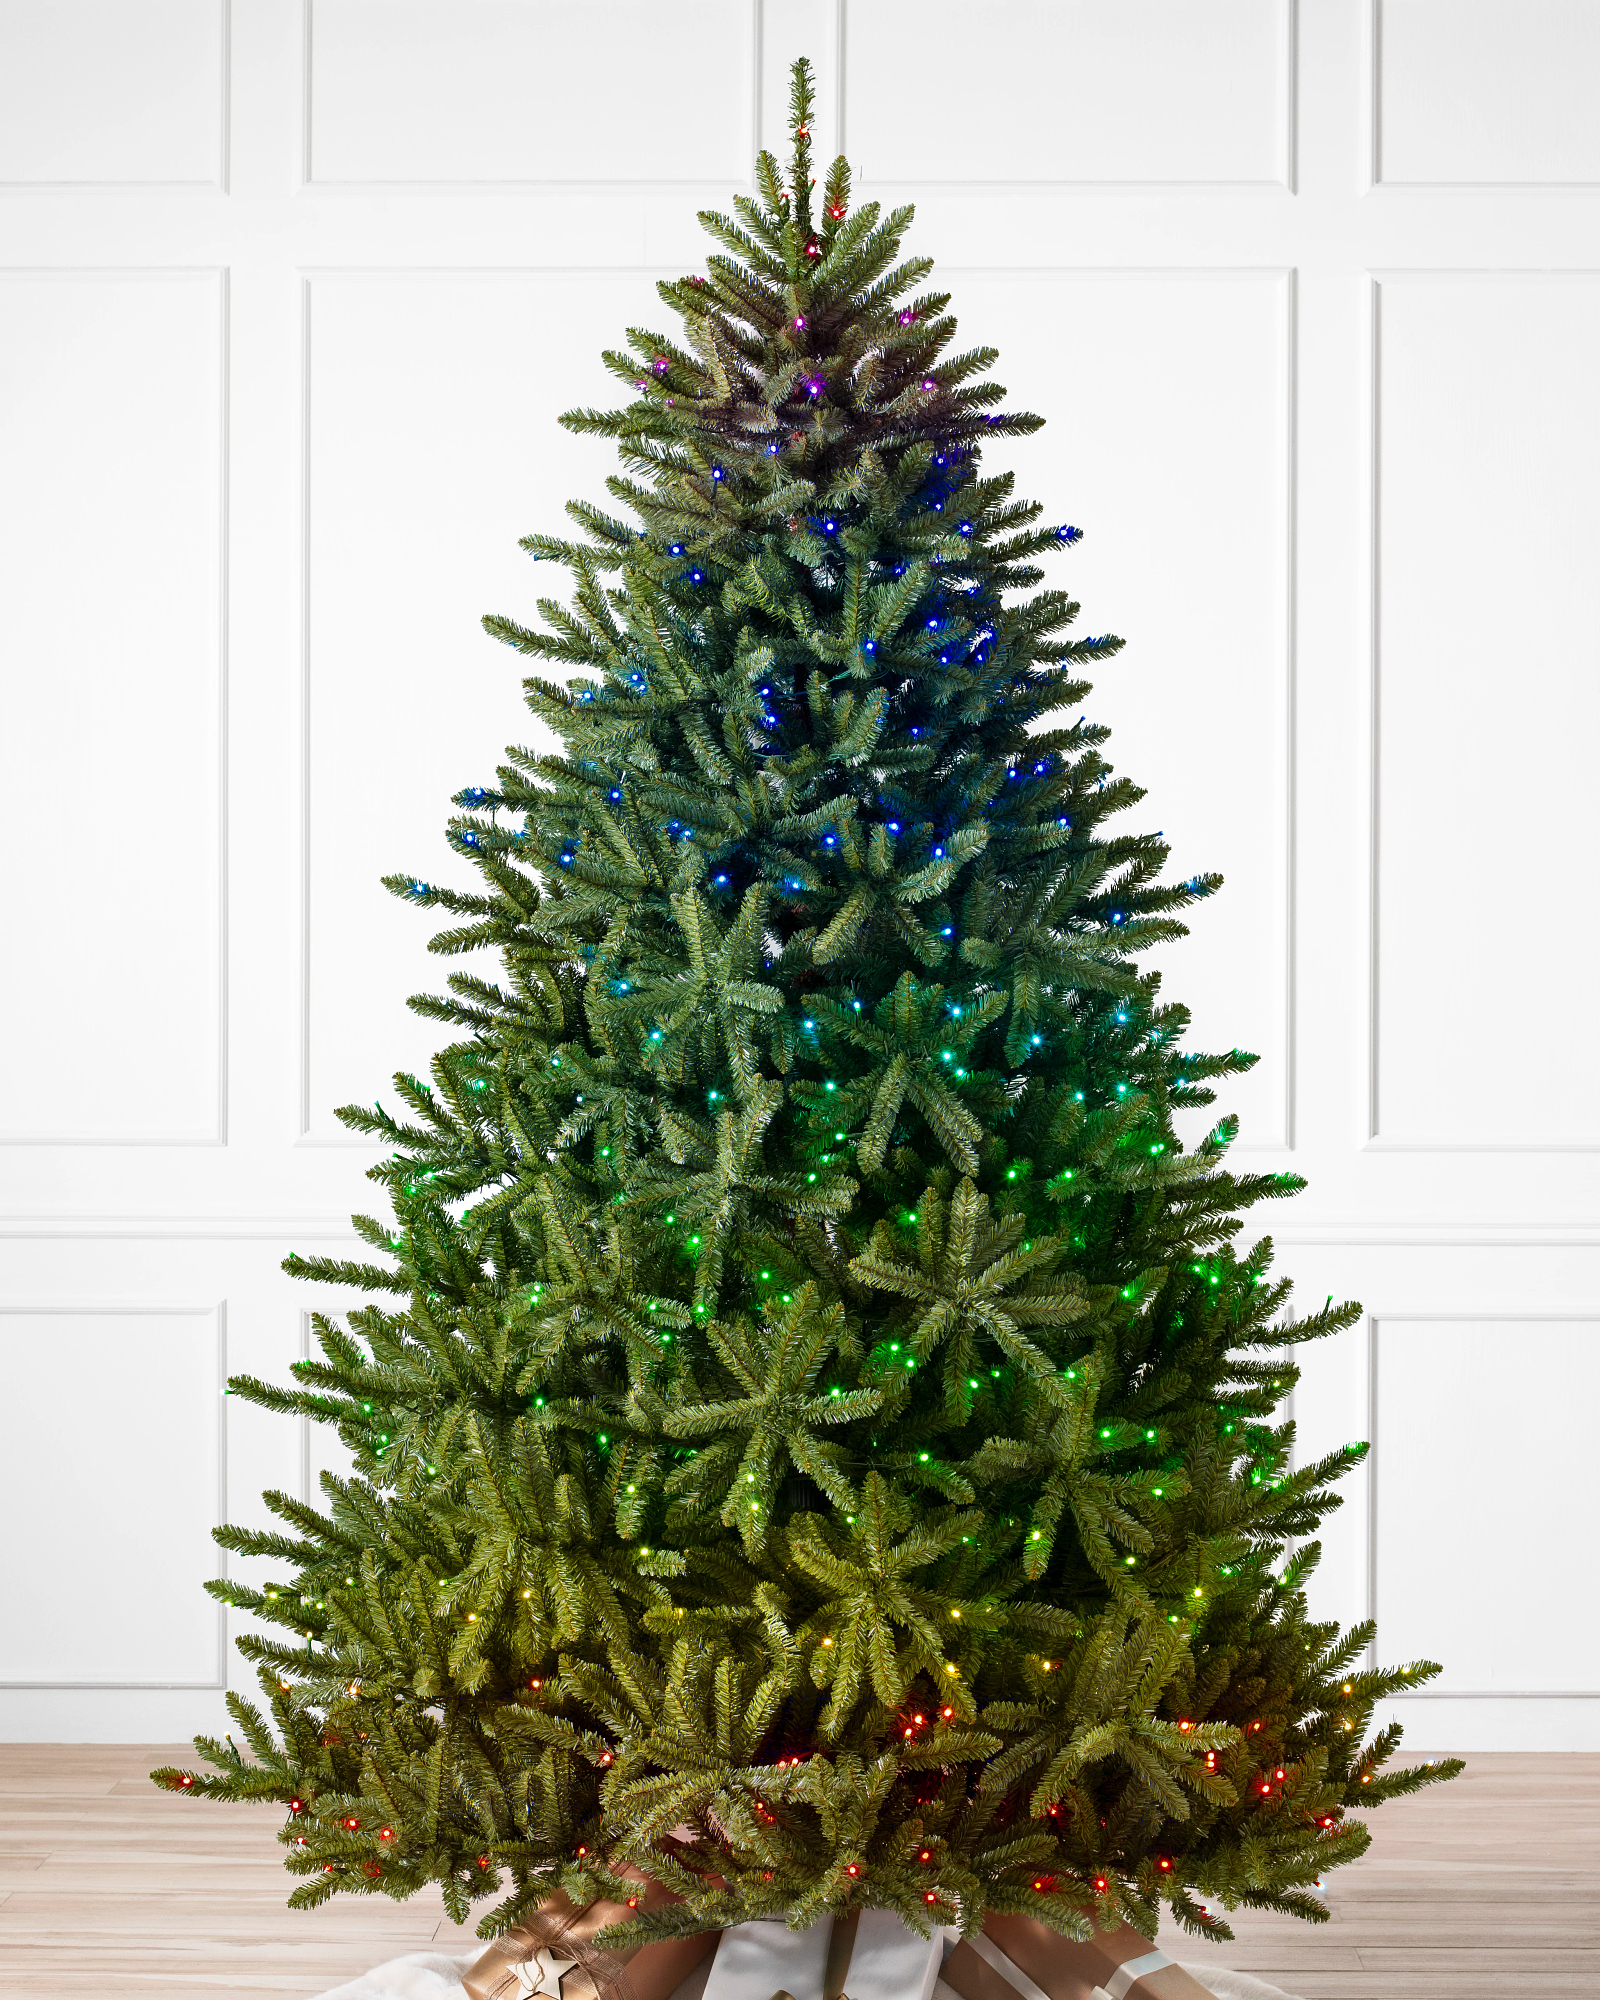 https://source.widen.net/content/jjvopp1lrm/jpeg/Classic-Blue-Spruce-Artificial-Christmas-Tree_Twinkly_SSC.jpeg?w=1600&h=2000&keep=c&crop=yes&color=cccccc&quality=100&u=7mzq6p